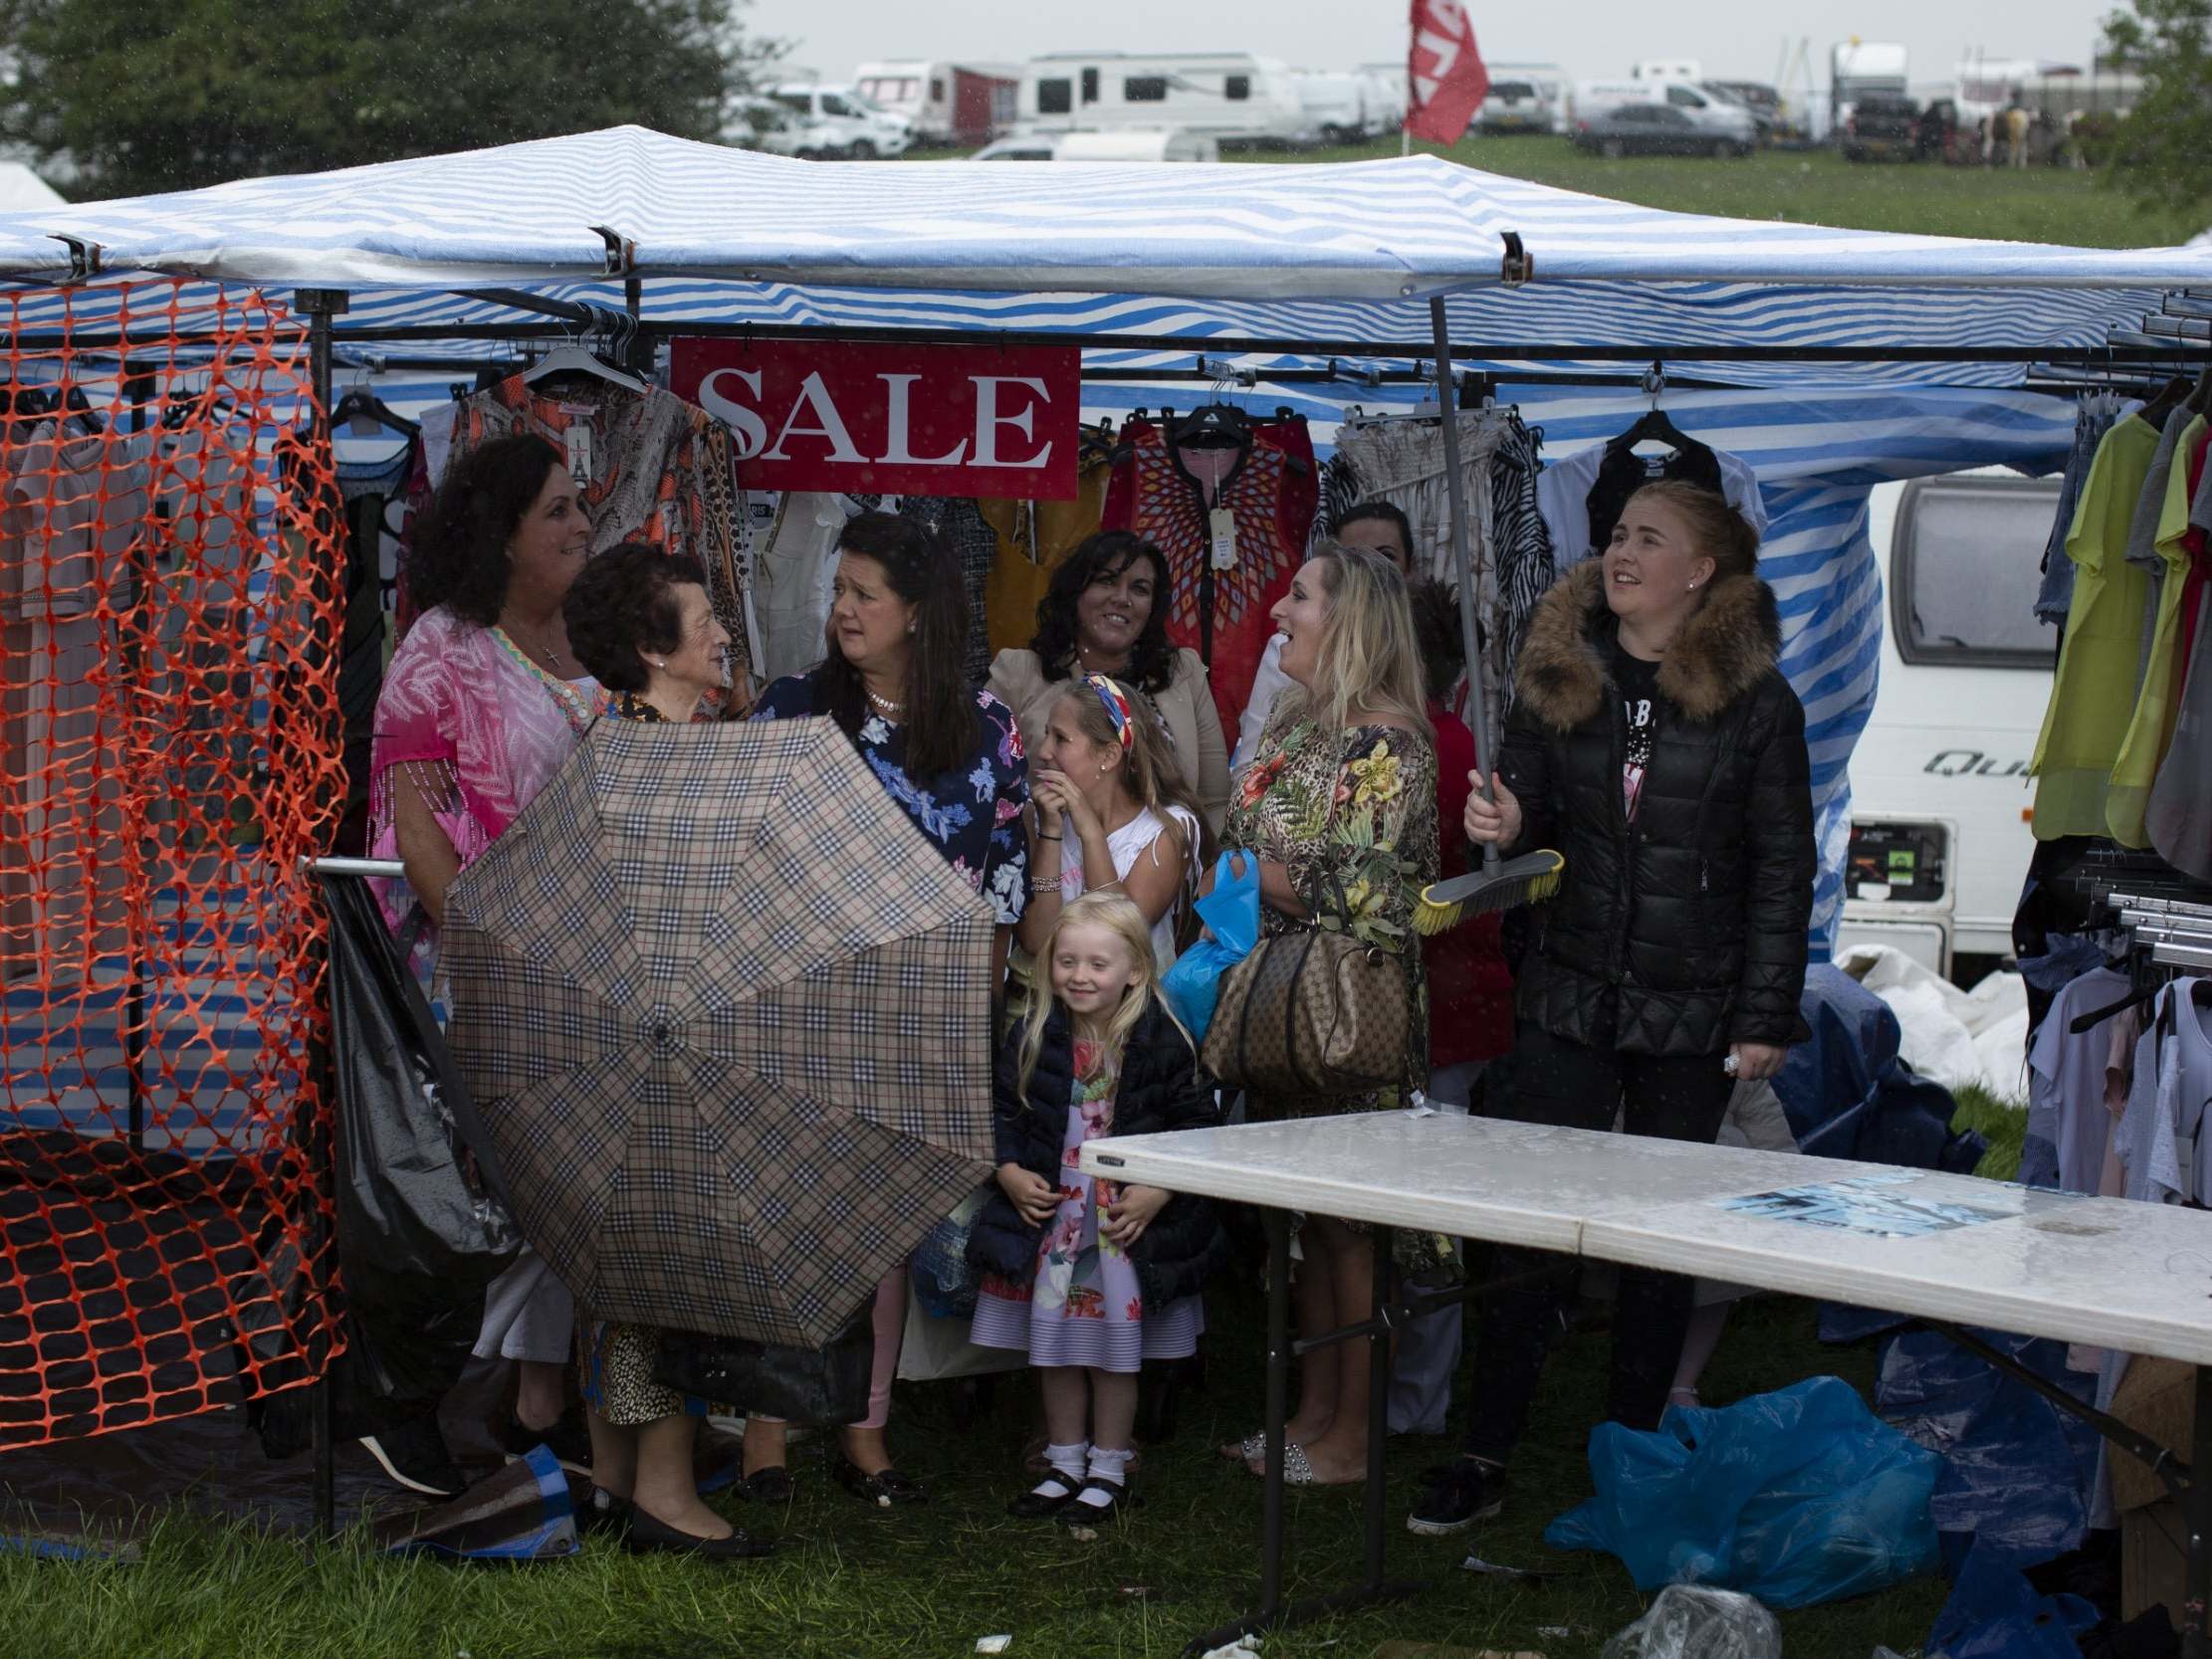 People shelter from the rain during the Appleby Horse Fair. The annual gathering for Gypsy, Romany and Traveller communities dates back to 1685